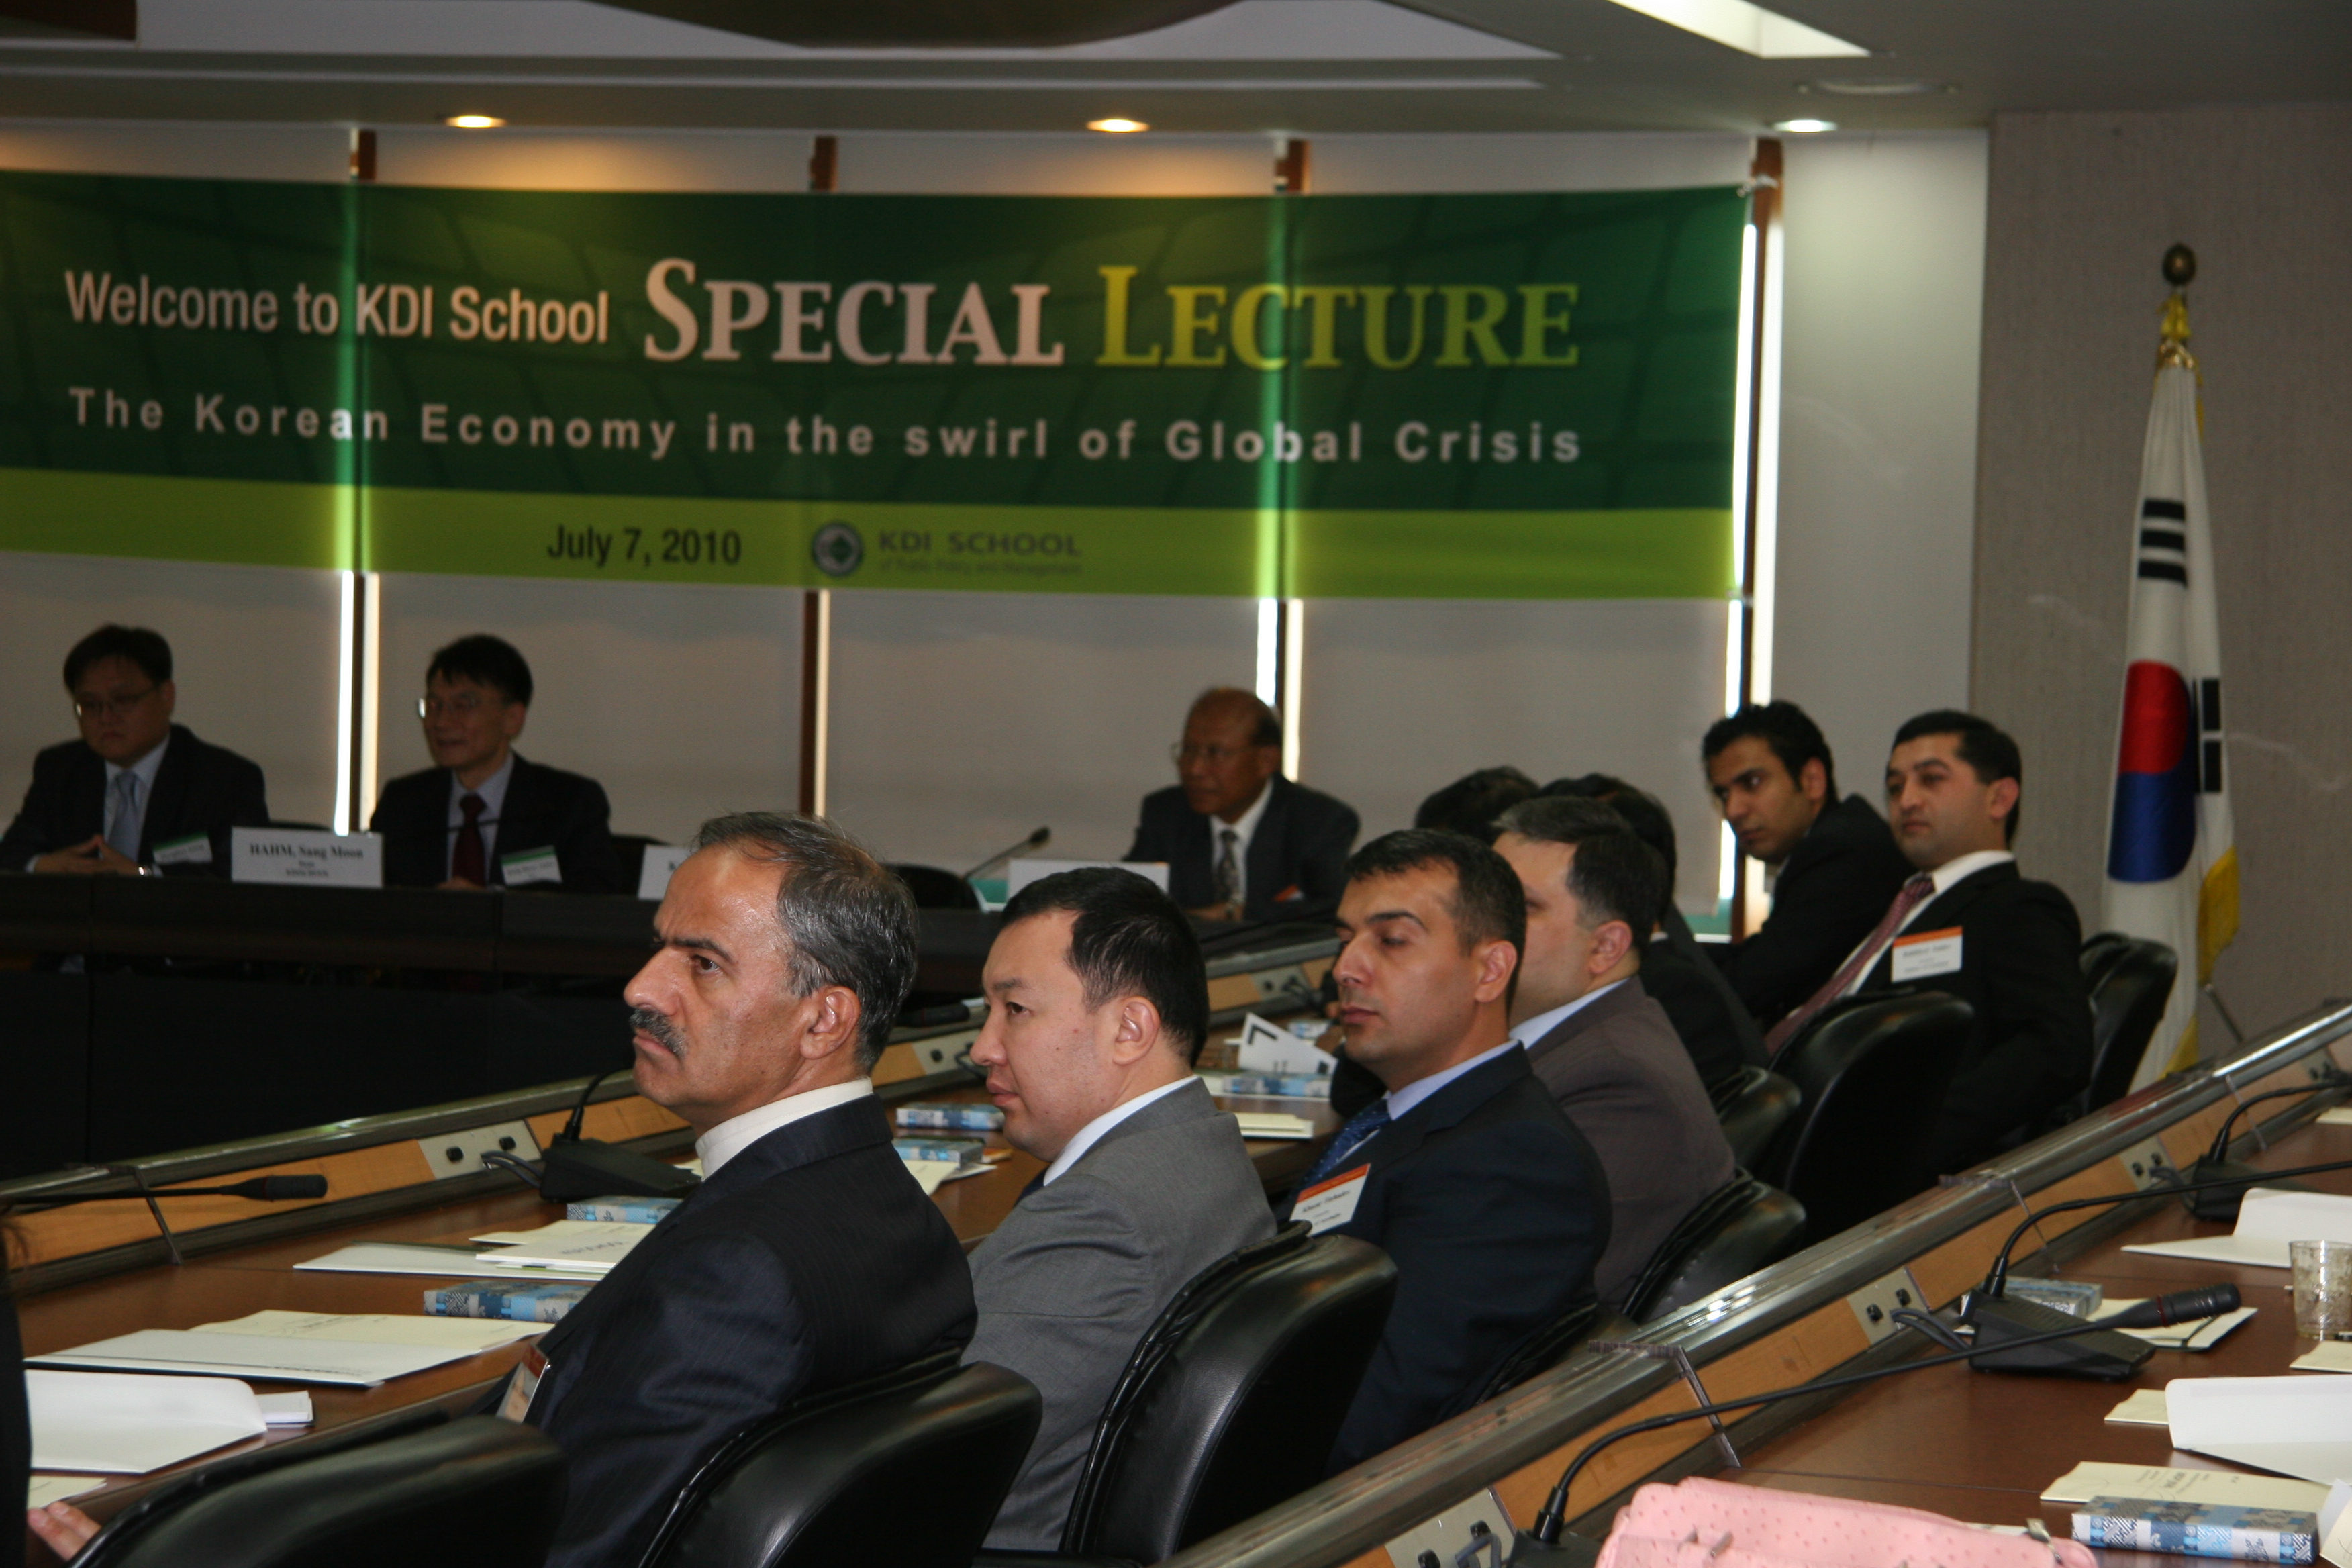 KDI School hosts special lecture